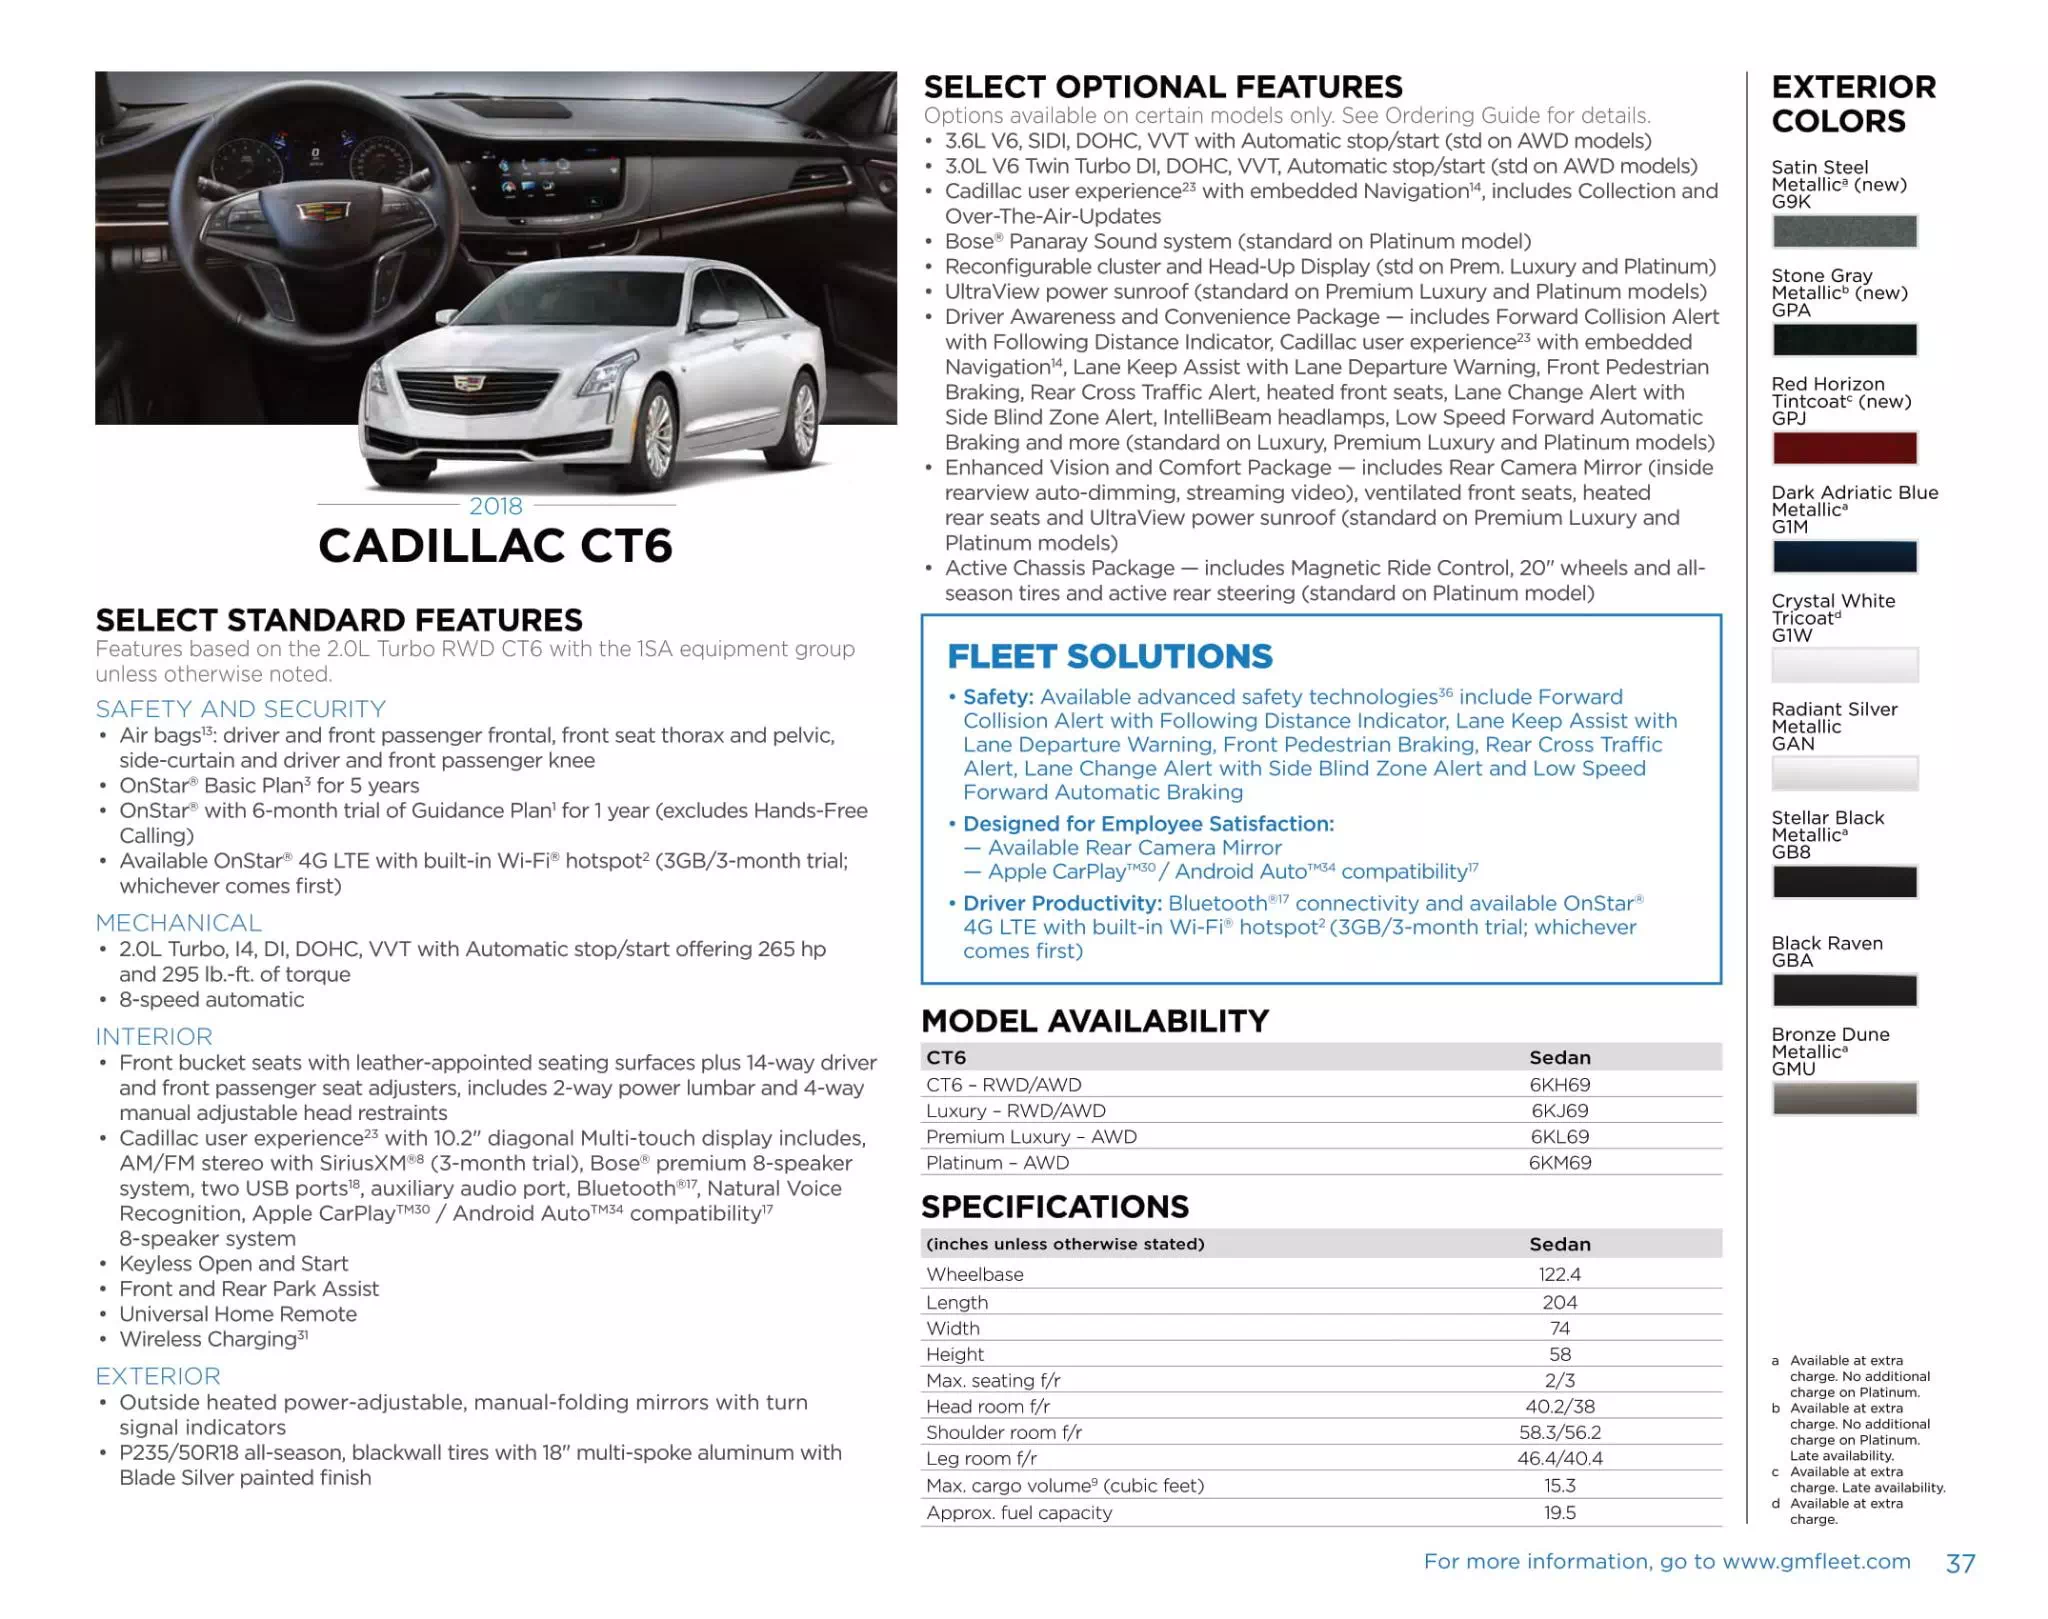 2018 GM Sell Sheet For ct6 Color Codes and Models